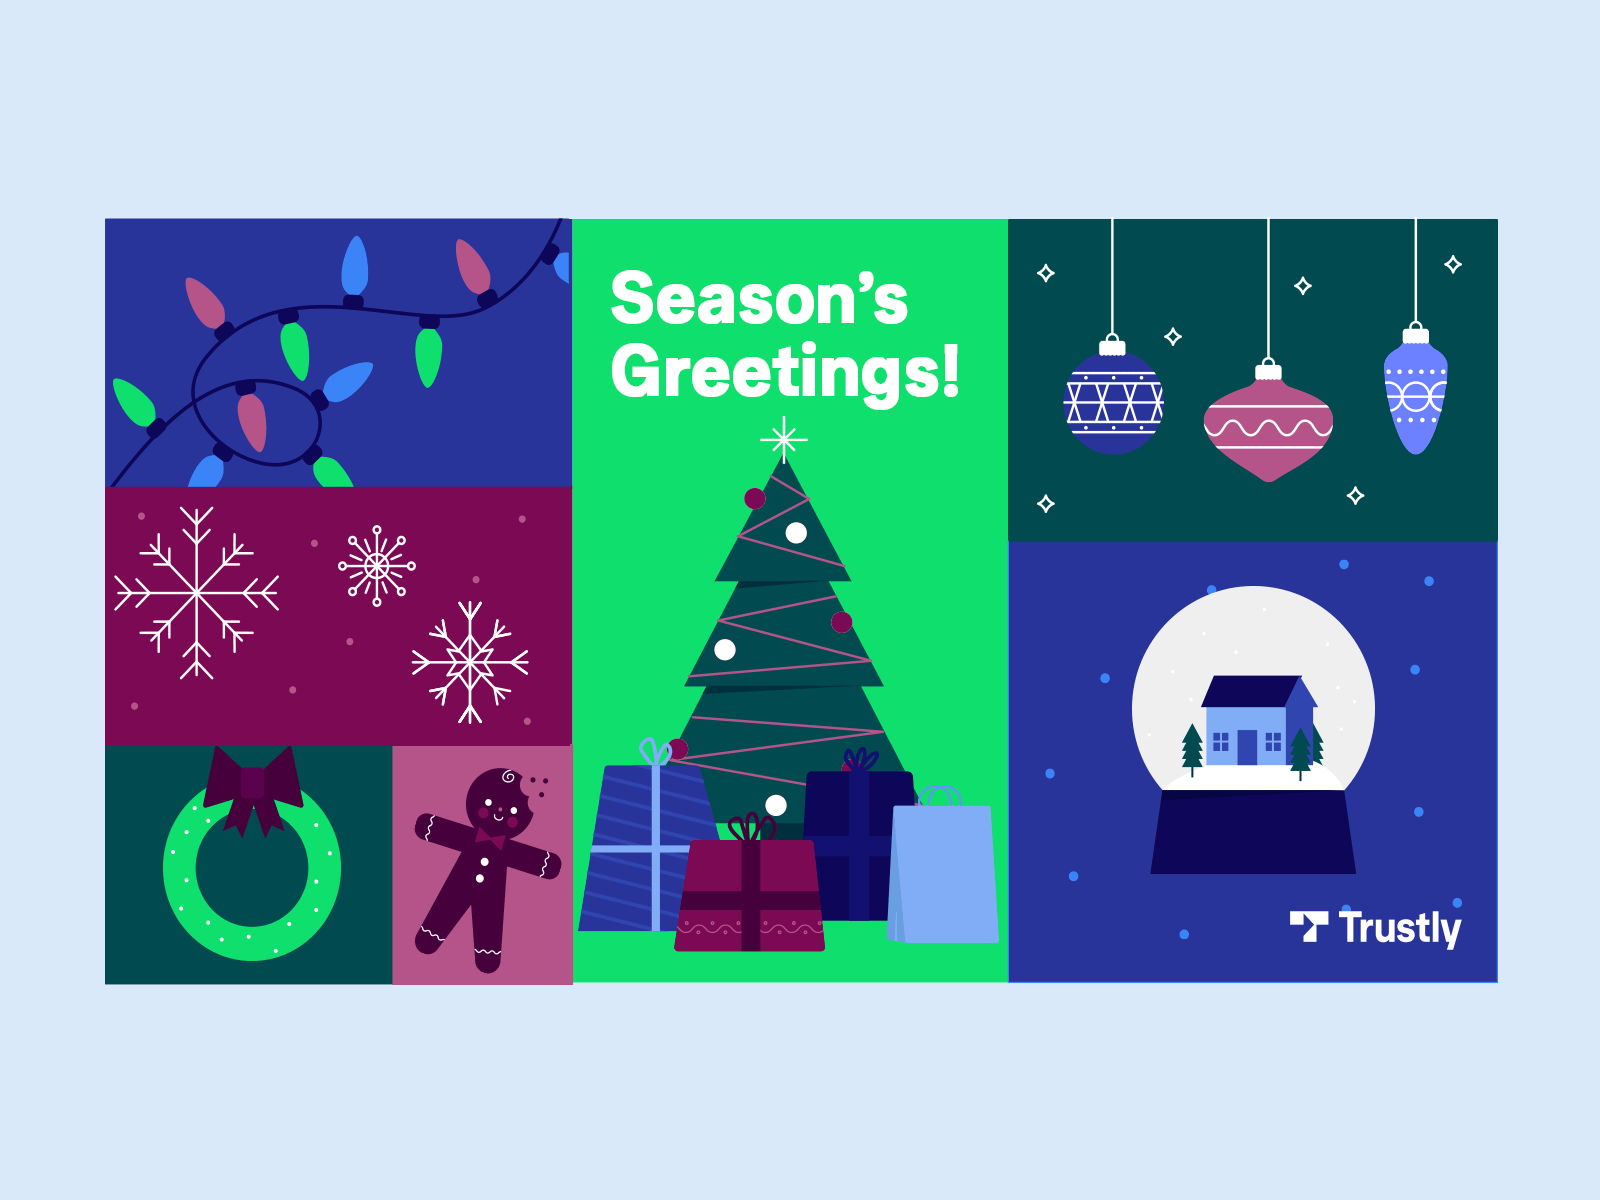 Trustly Holiday Banner